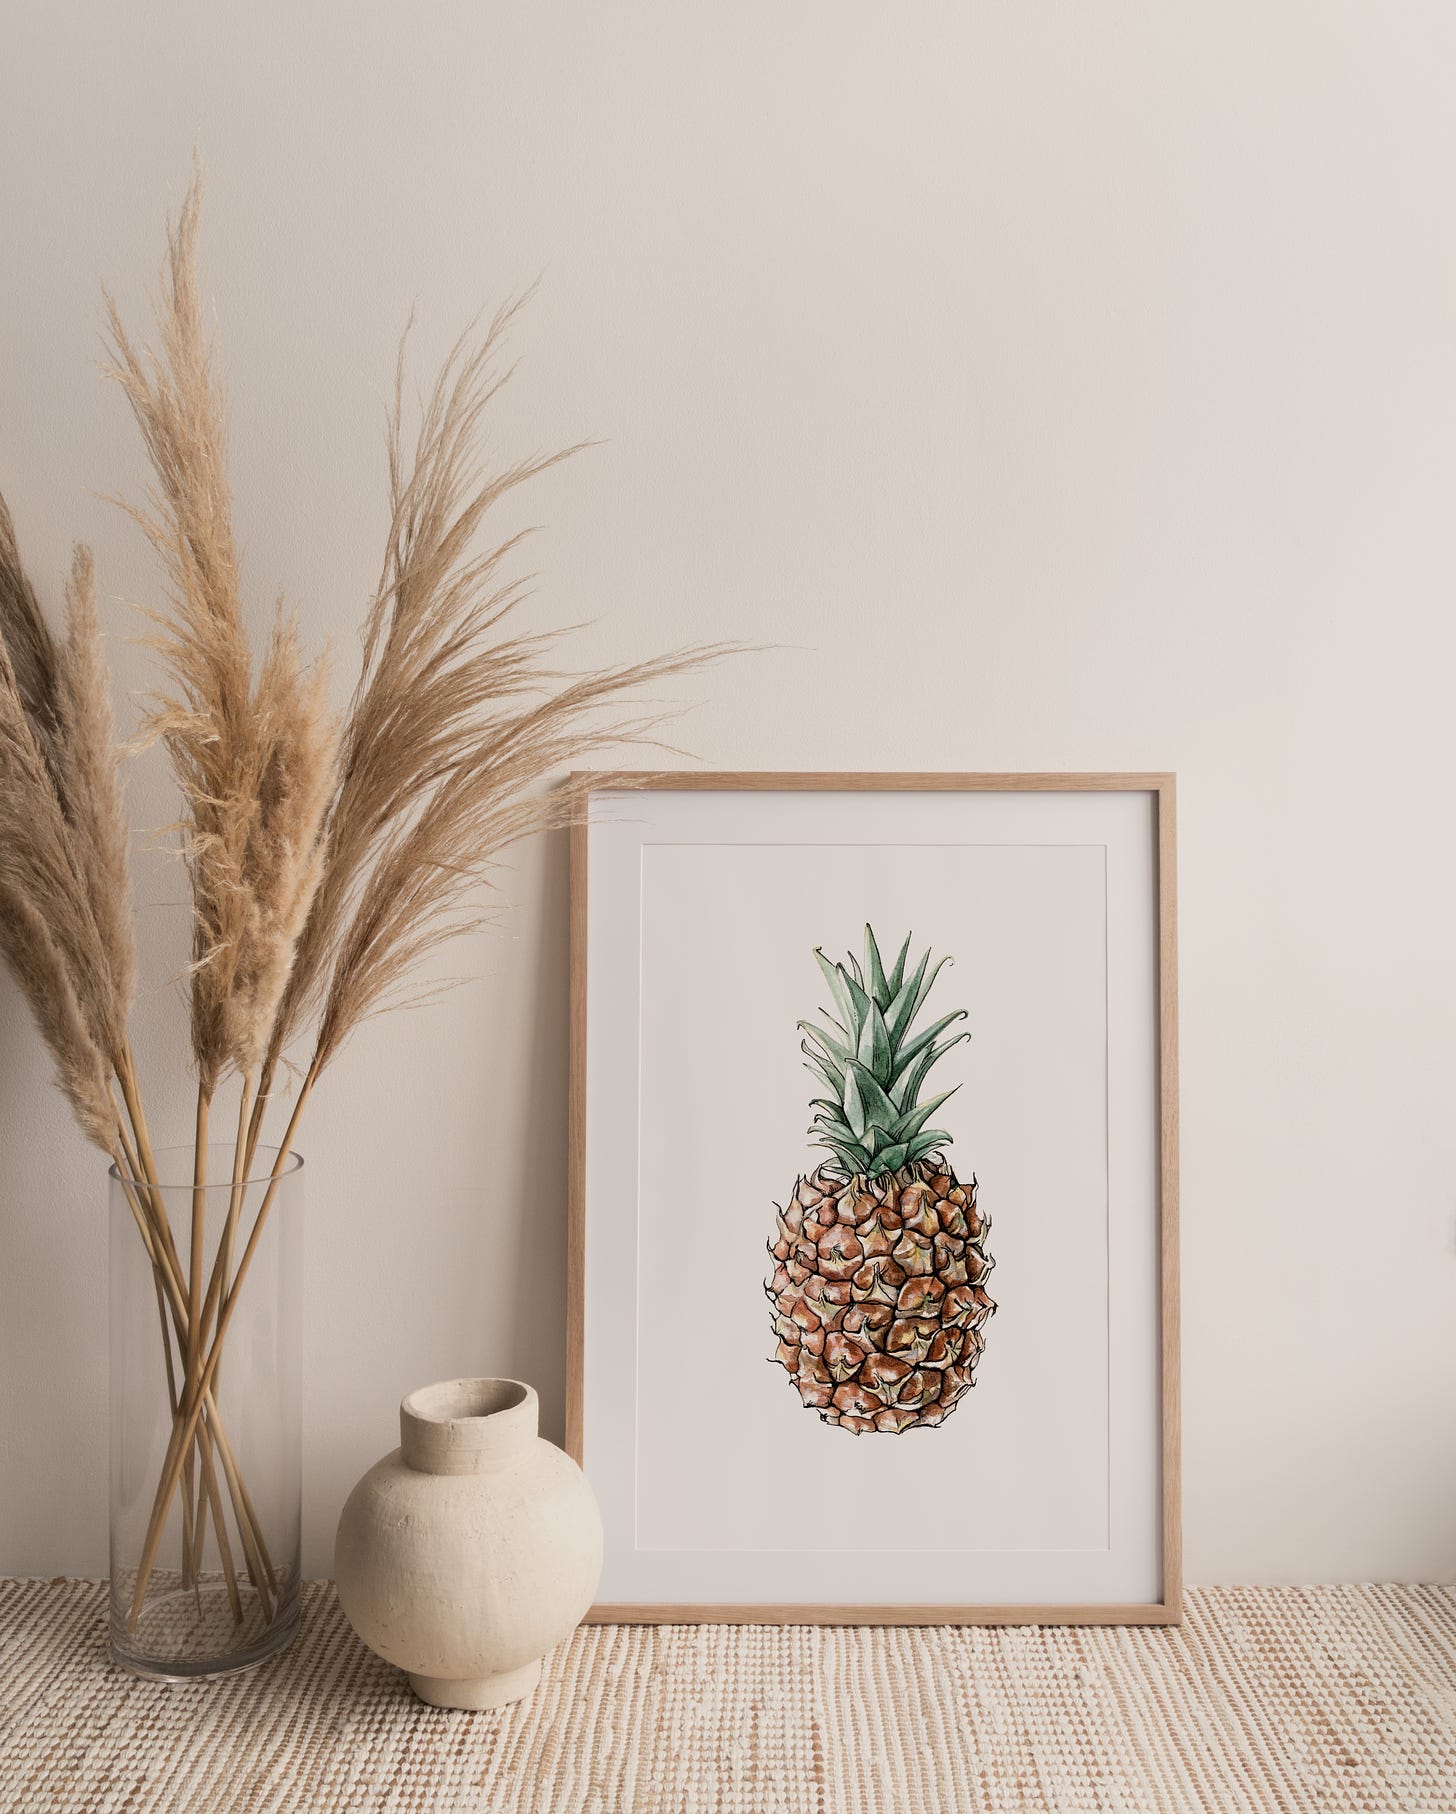 A framed print of a pineapple painted in watercolor, sitting on a table with a vase of tall grasses to the left of it 